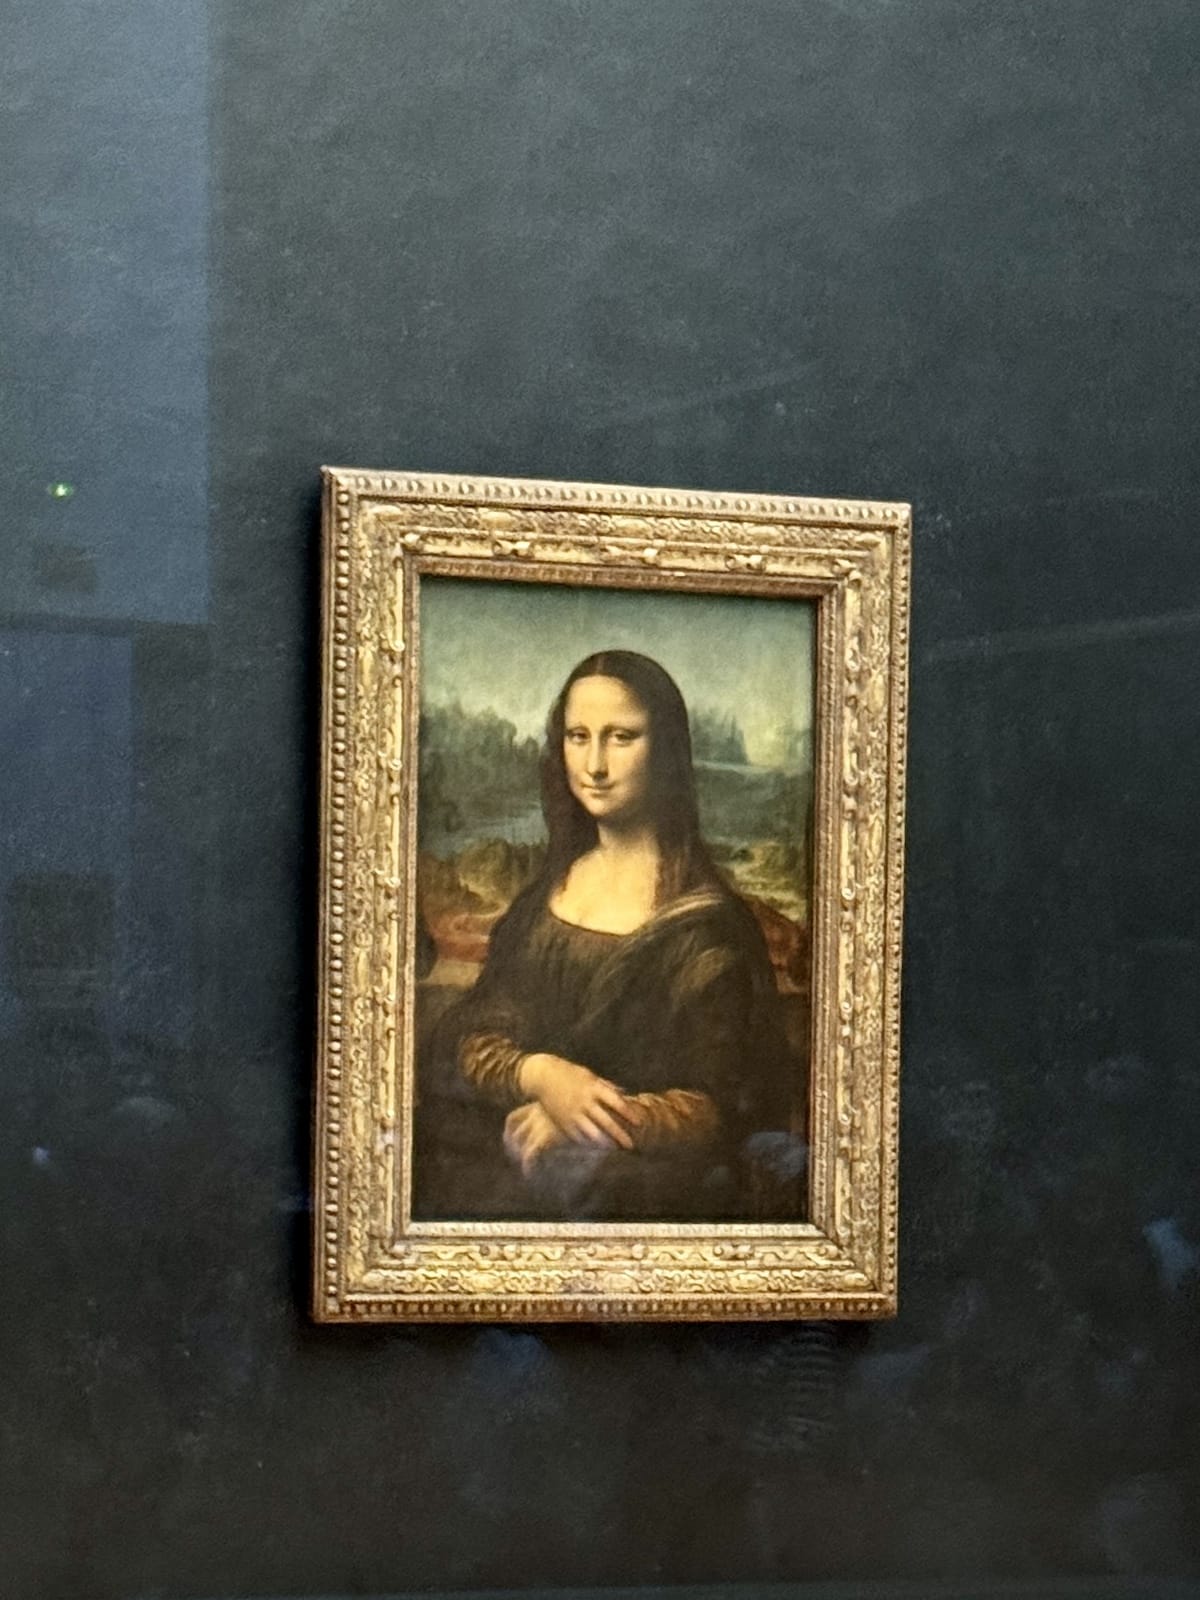 A framed painting of the Mona Lisa displayed on a dark wall evokes the charm of one day in Paris. The subject is a woman with long hair, a faint smile, and folded hands. The background features a serene landscape.